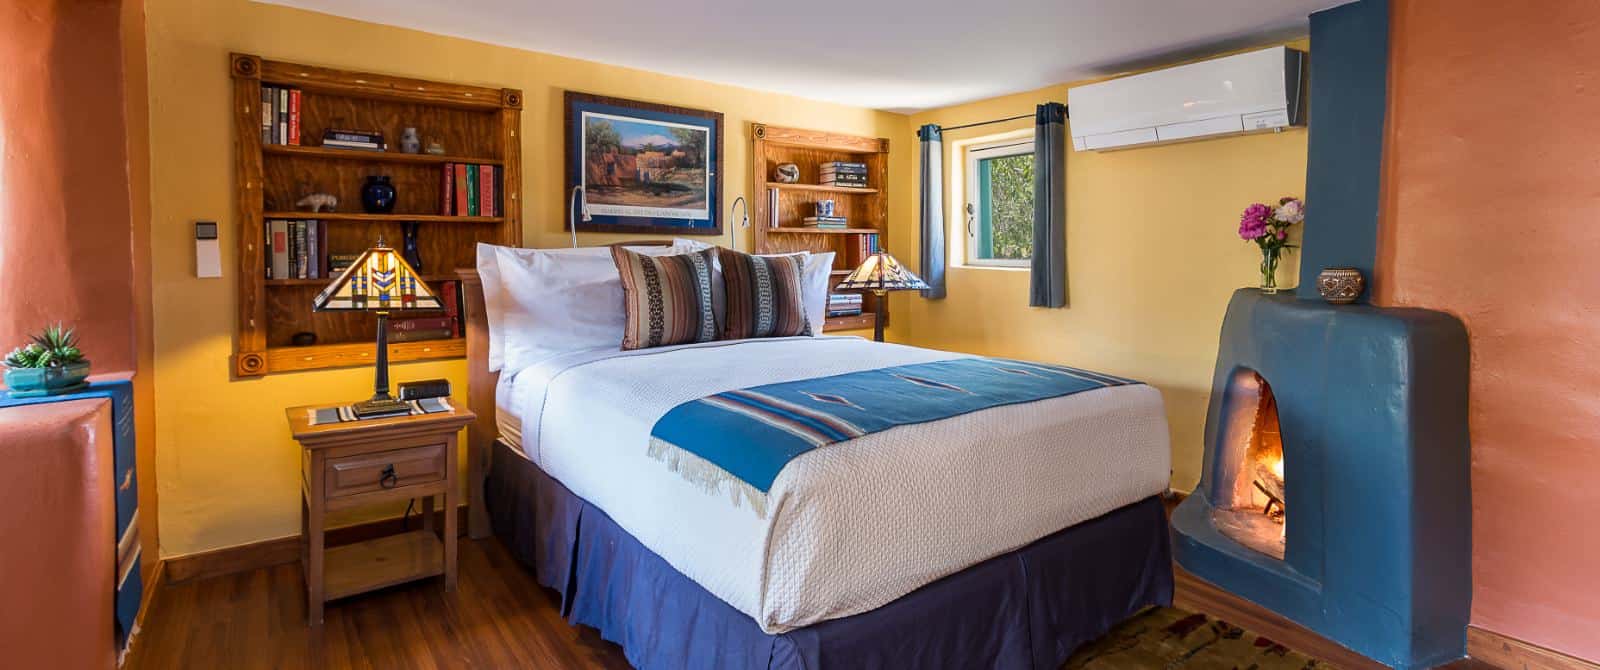 Bedroom with blue pueblo-style fireplace, bed made up in white and blue, nightstand and built-in wooden bookcases.